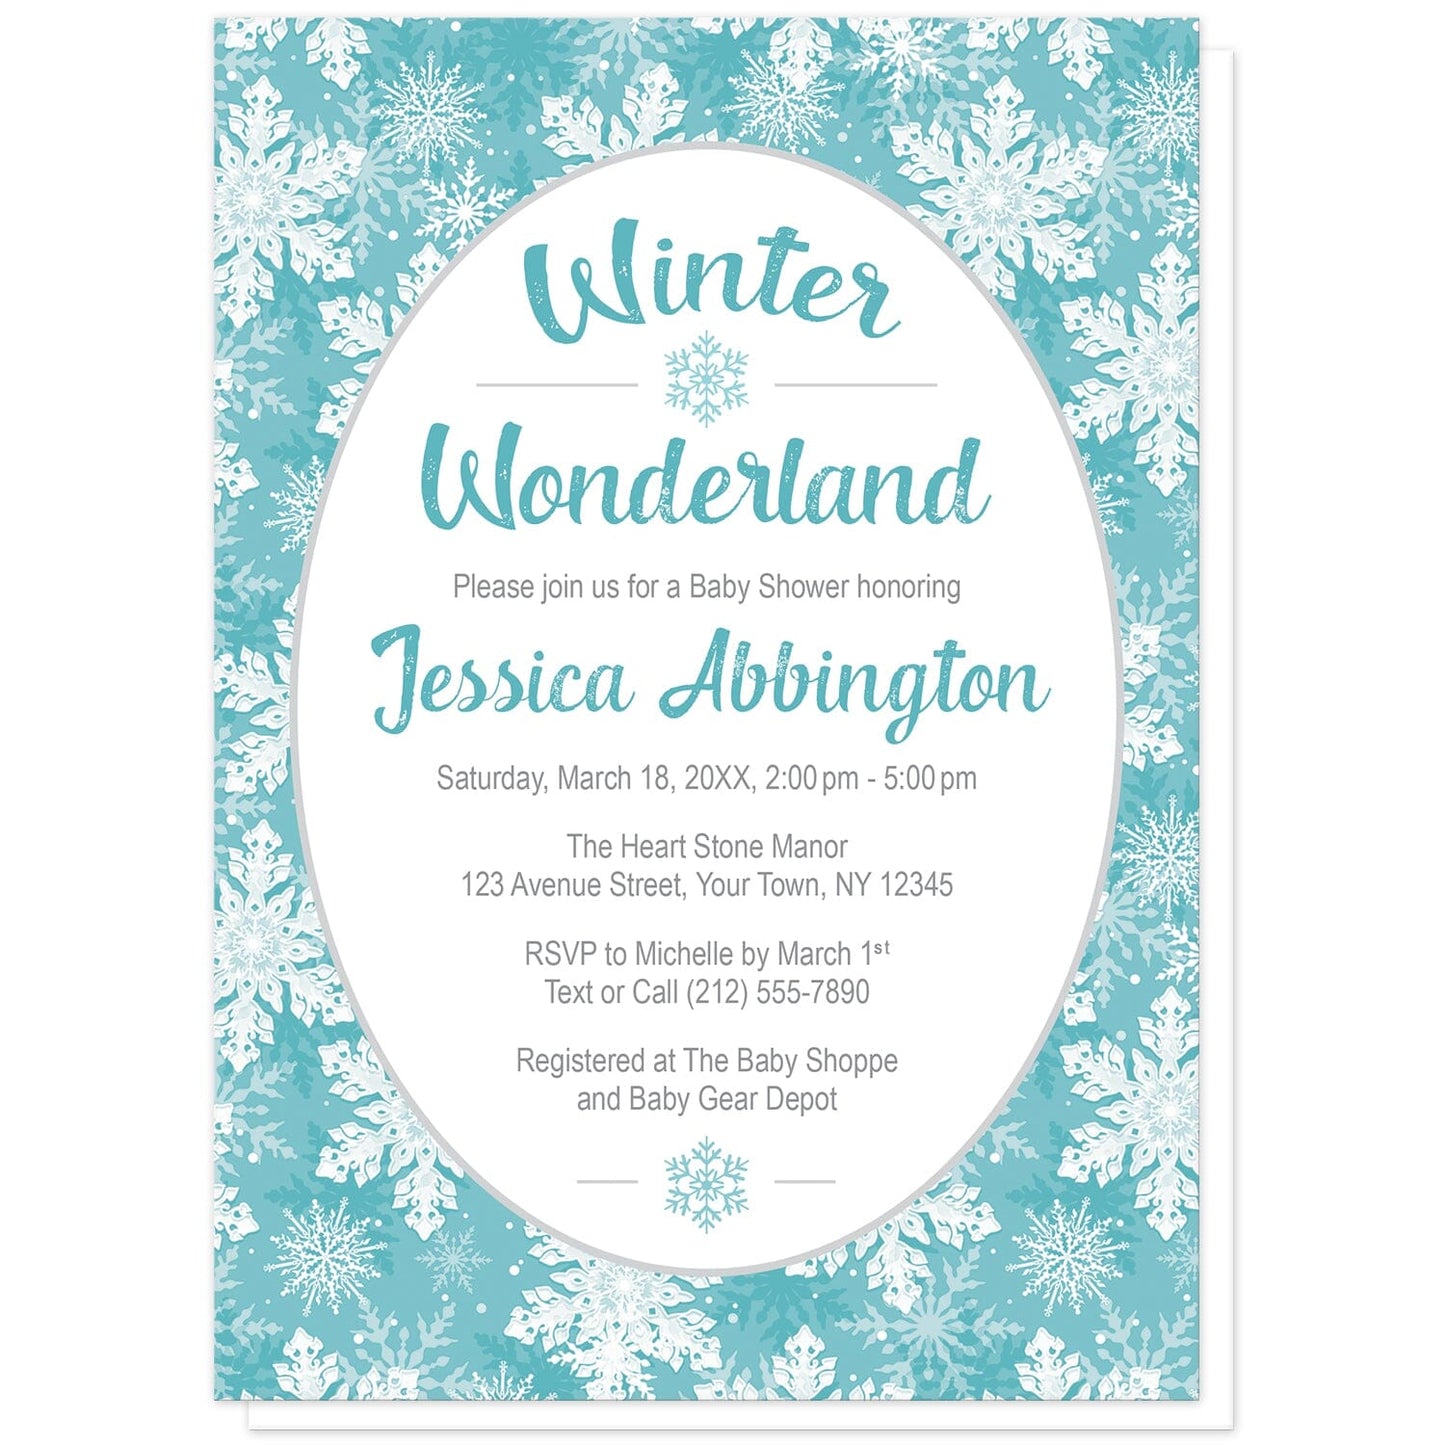 Teal Snowflake Winter Wonderland Baby Shower Invitations at Artistically Invited. Beautifully ornate teal snowflake Winter Wonderland baby shower invitations designed with your personalized celebration details custom printed in teal and gray in a white oval frame design over a pretty teal, turquoise, and white snowflake pattern background.